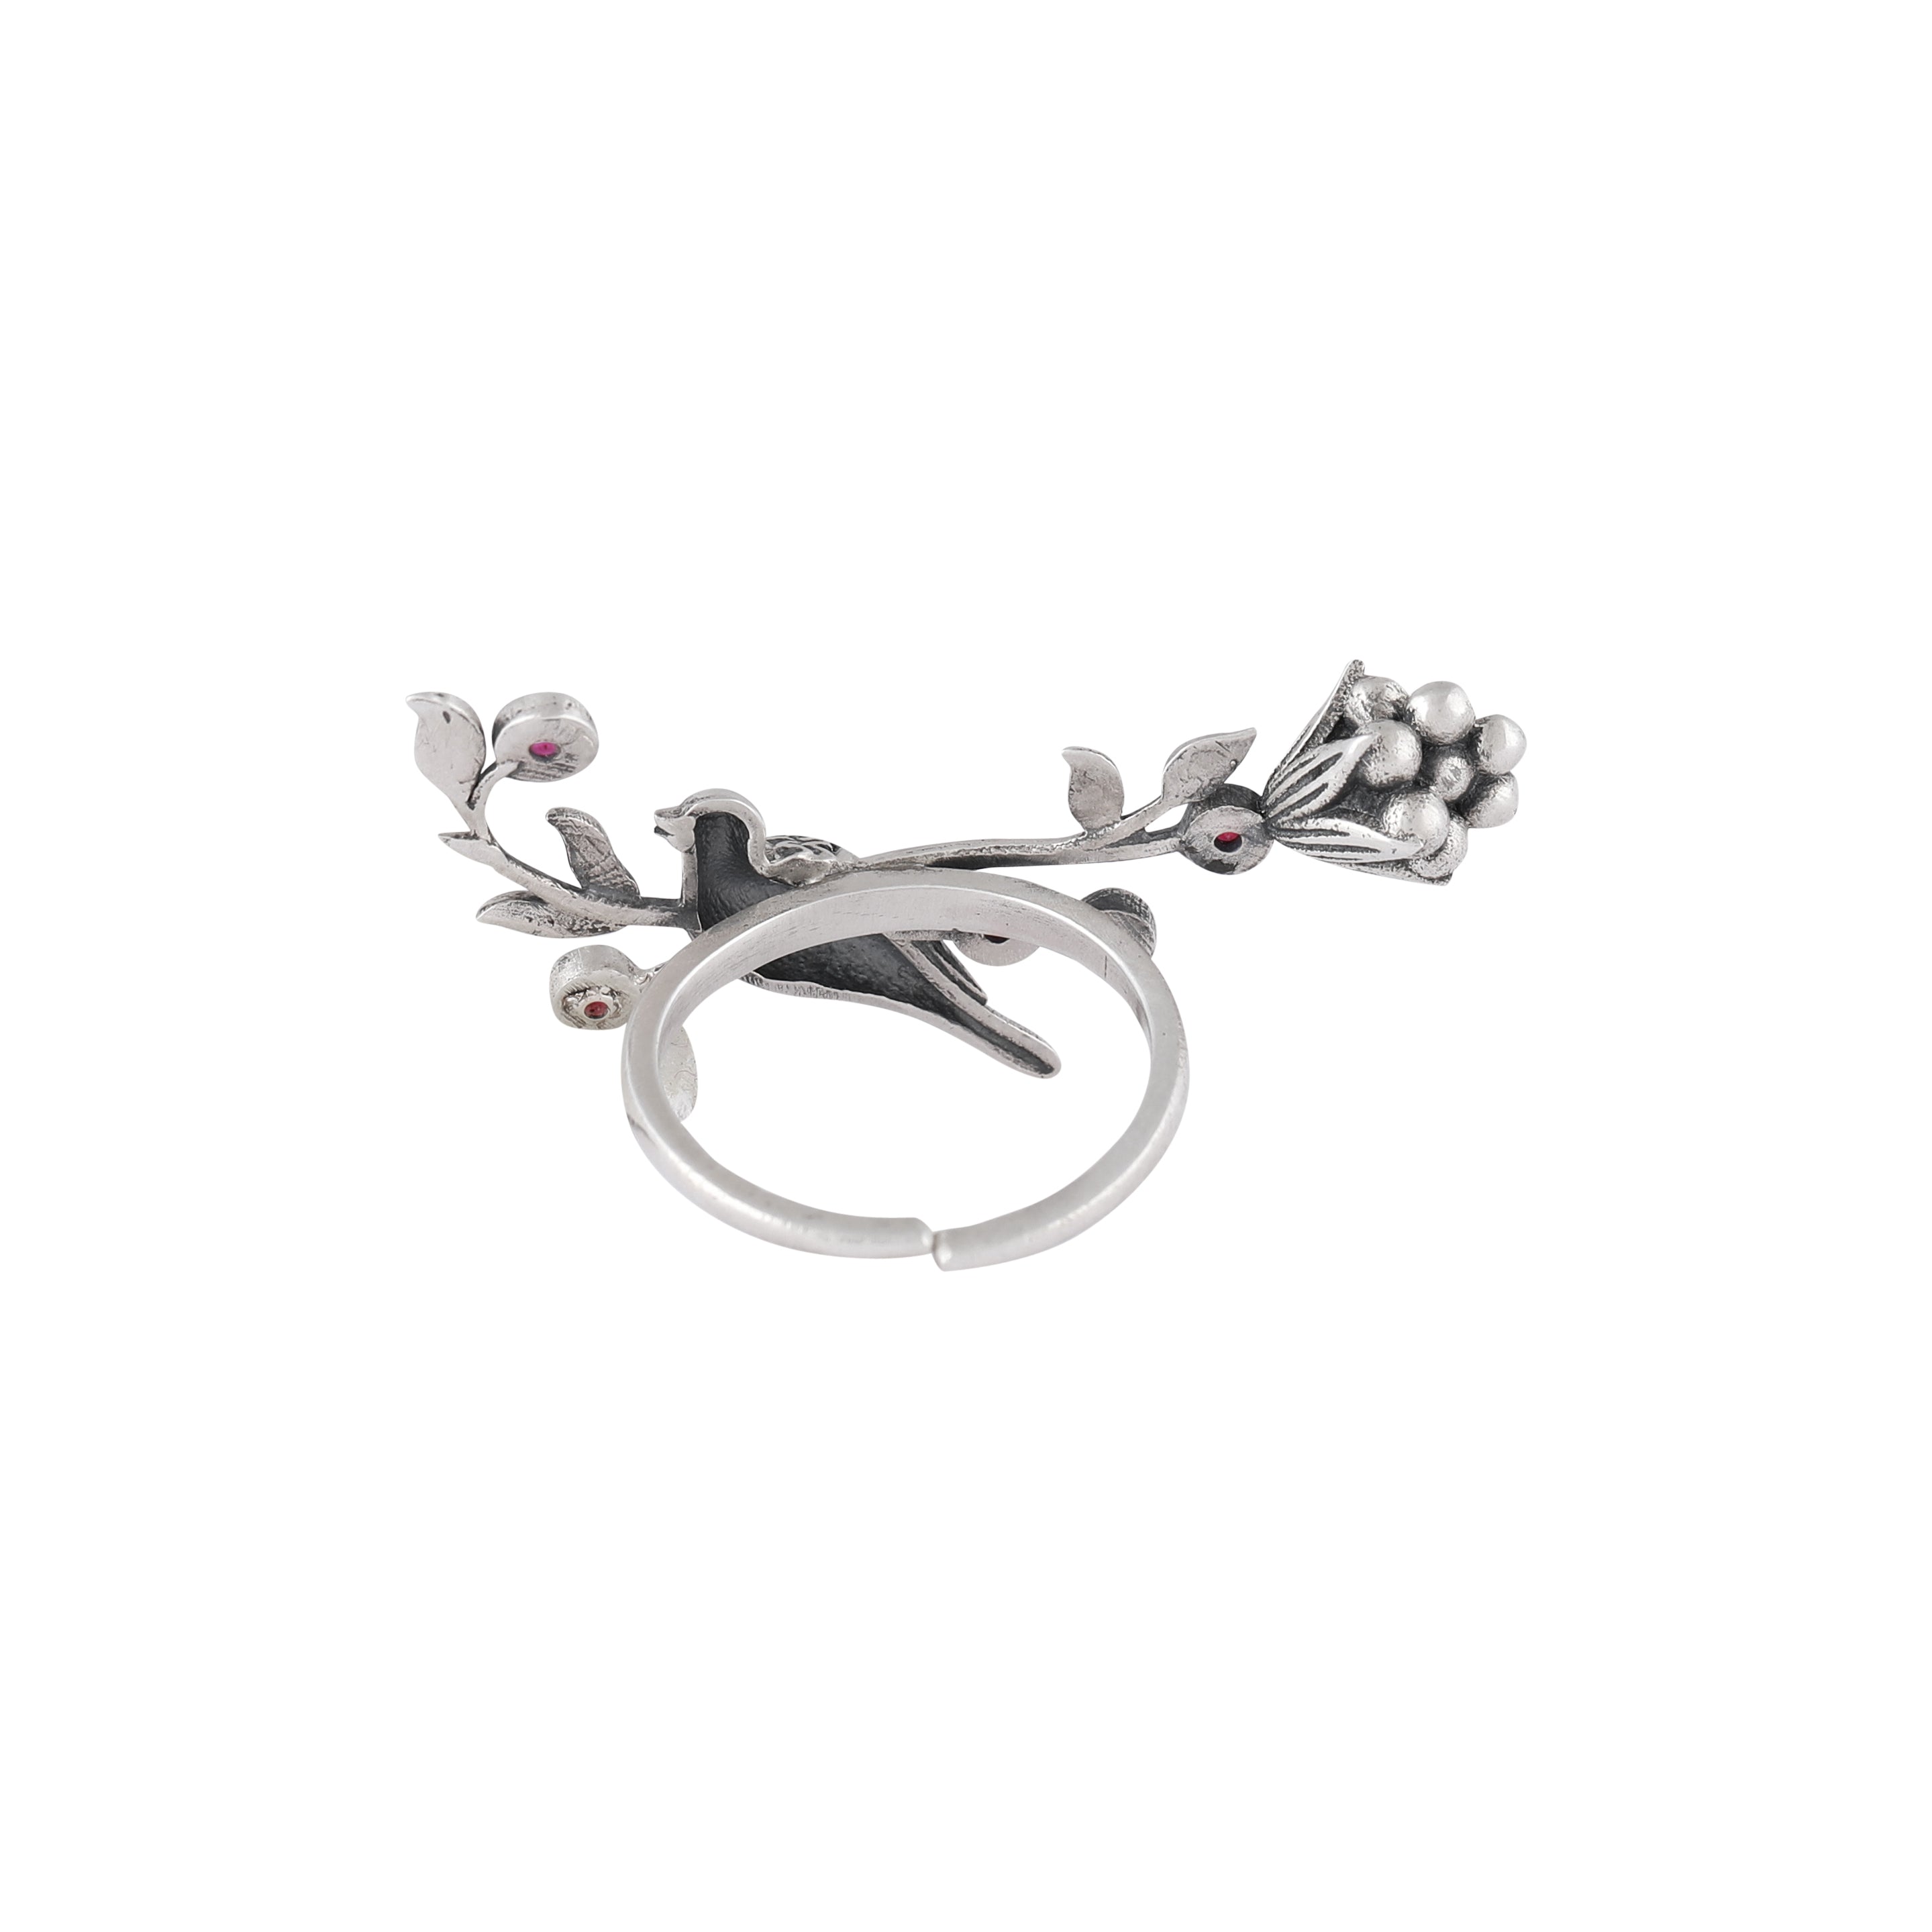 William Morris - Strawberry Thief Silver Creeper Finger Ring by Moha